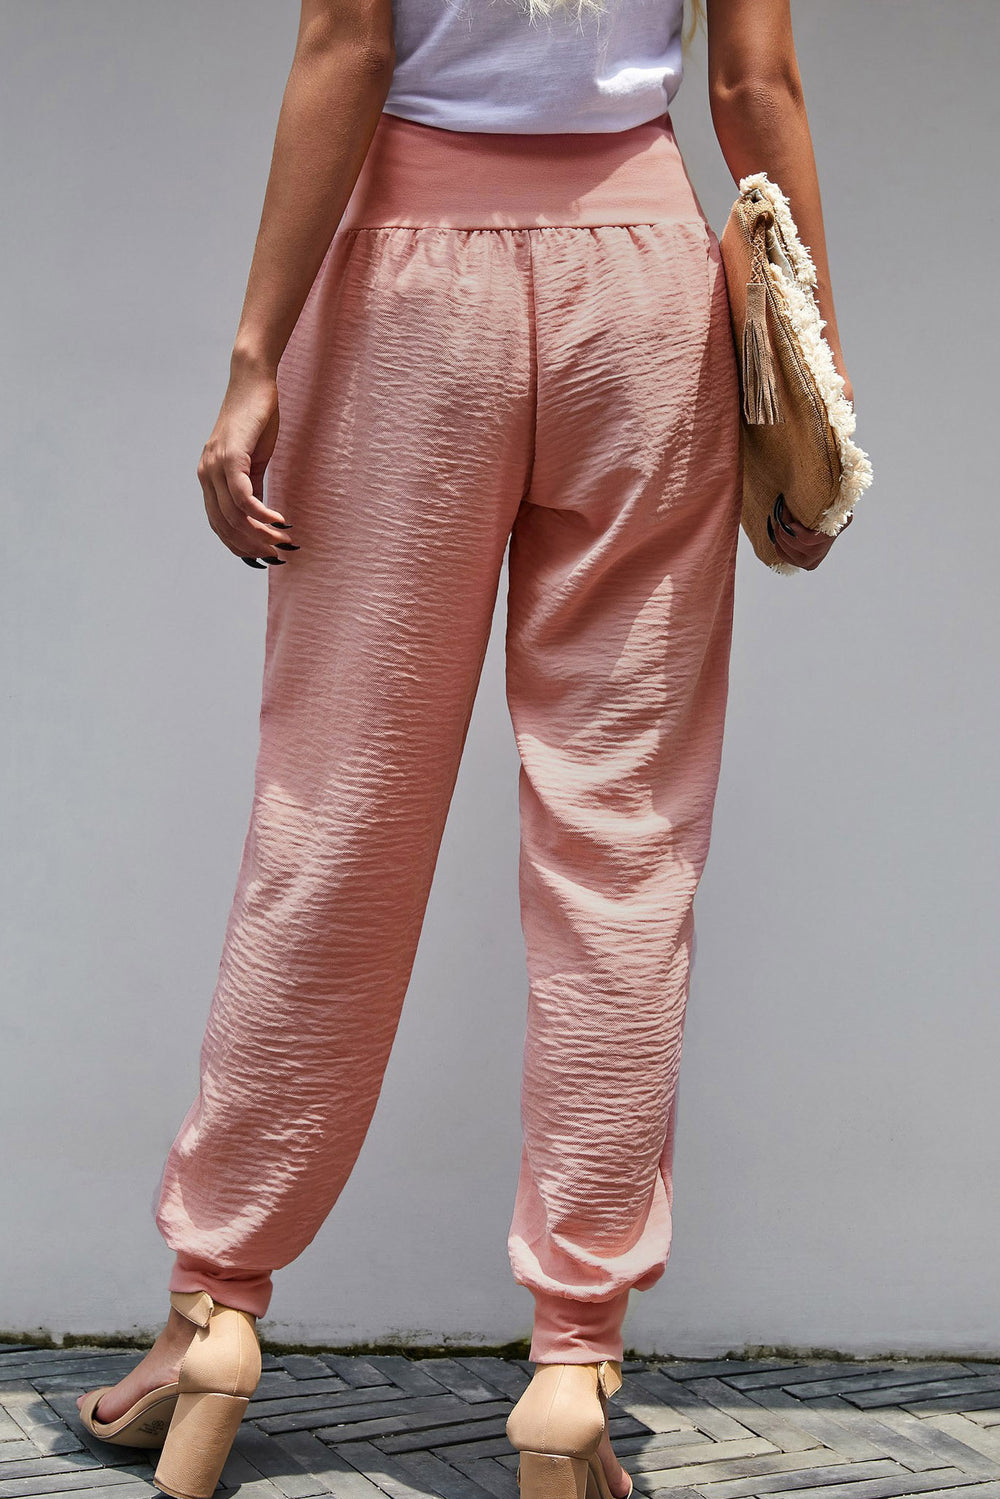 Casual Pink Pocketed Stretchy High Waistband Cotton Joggers